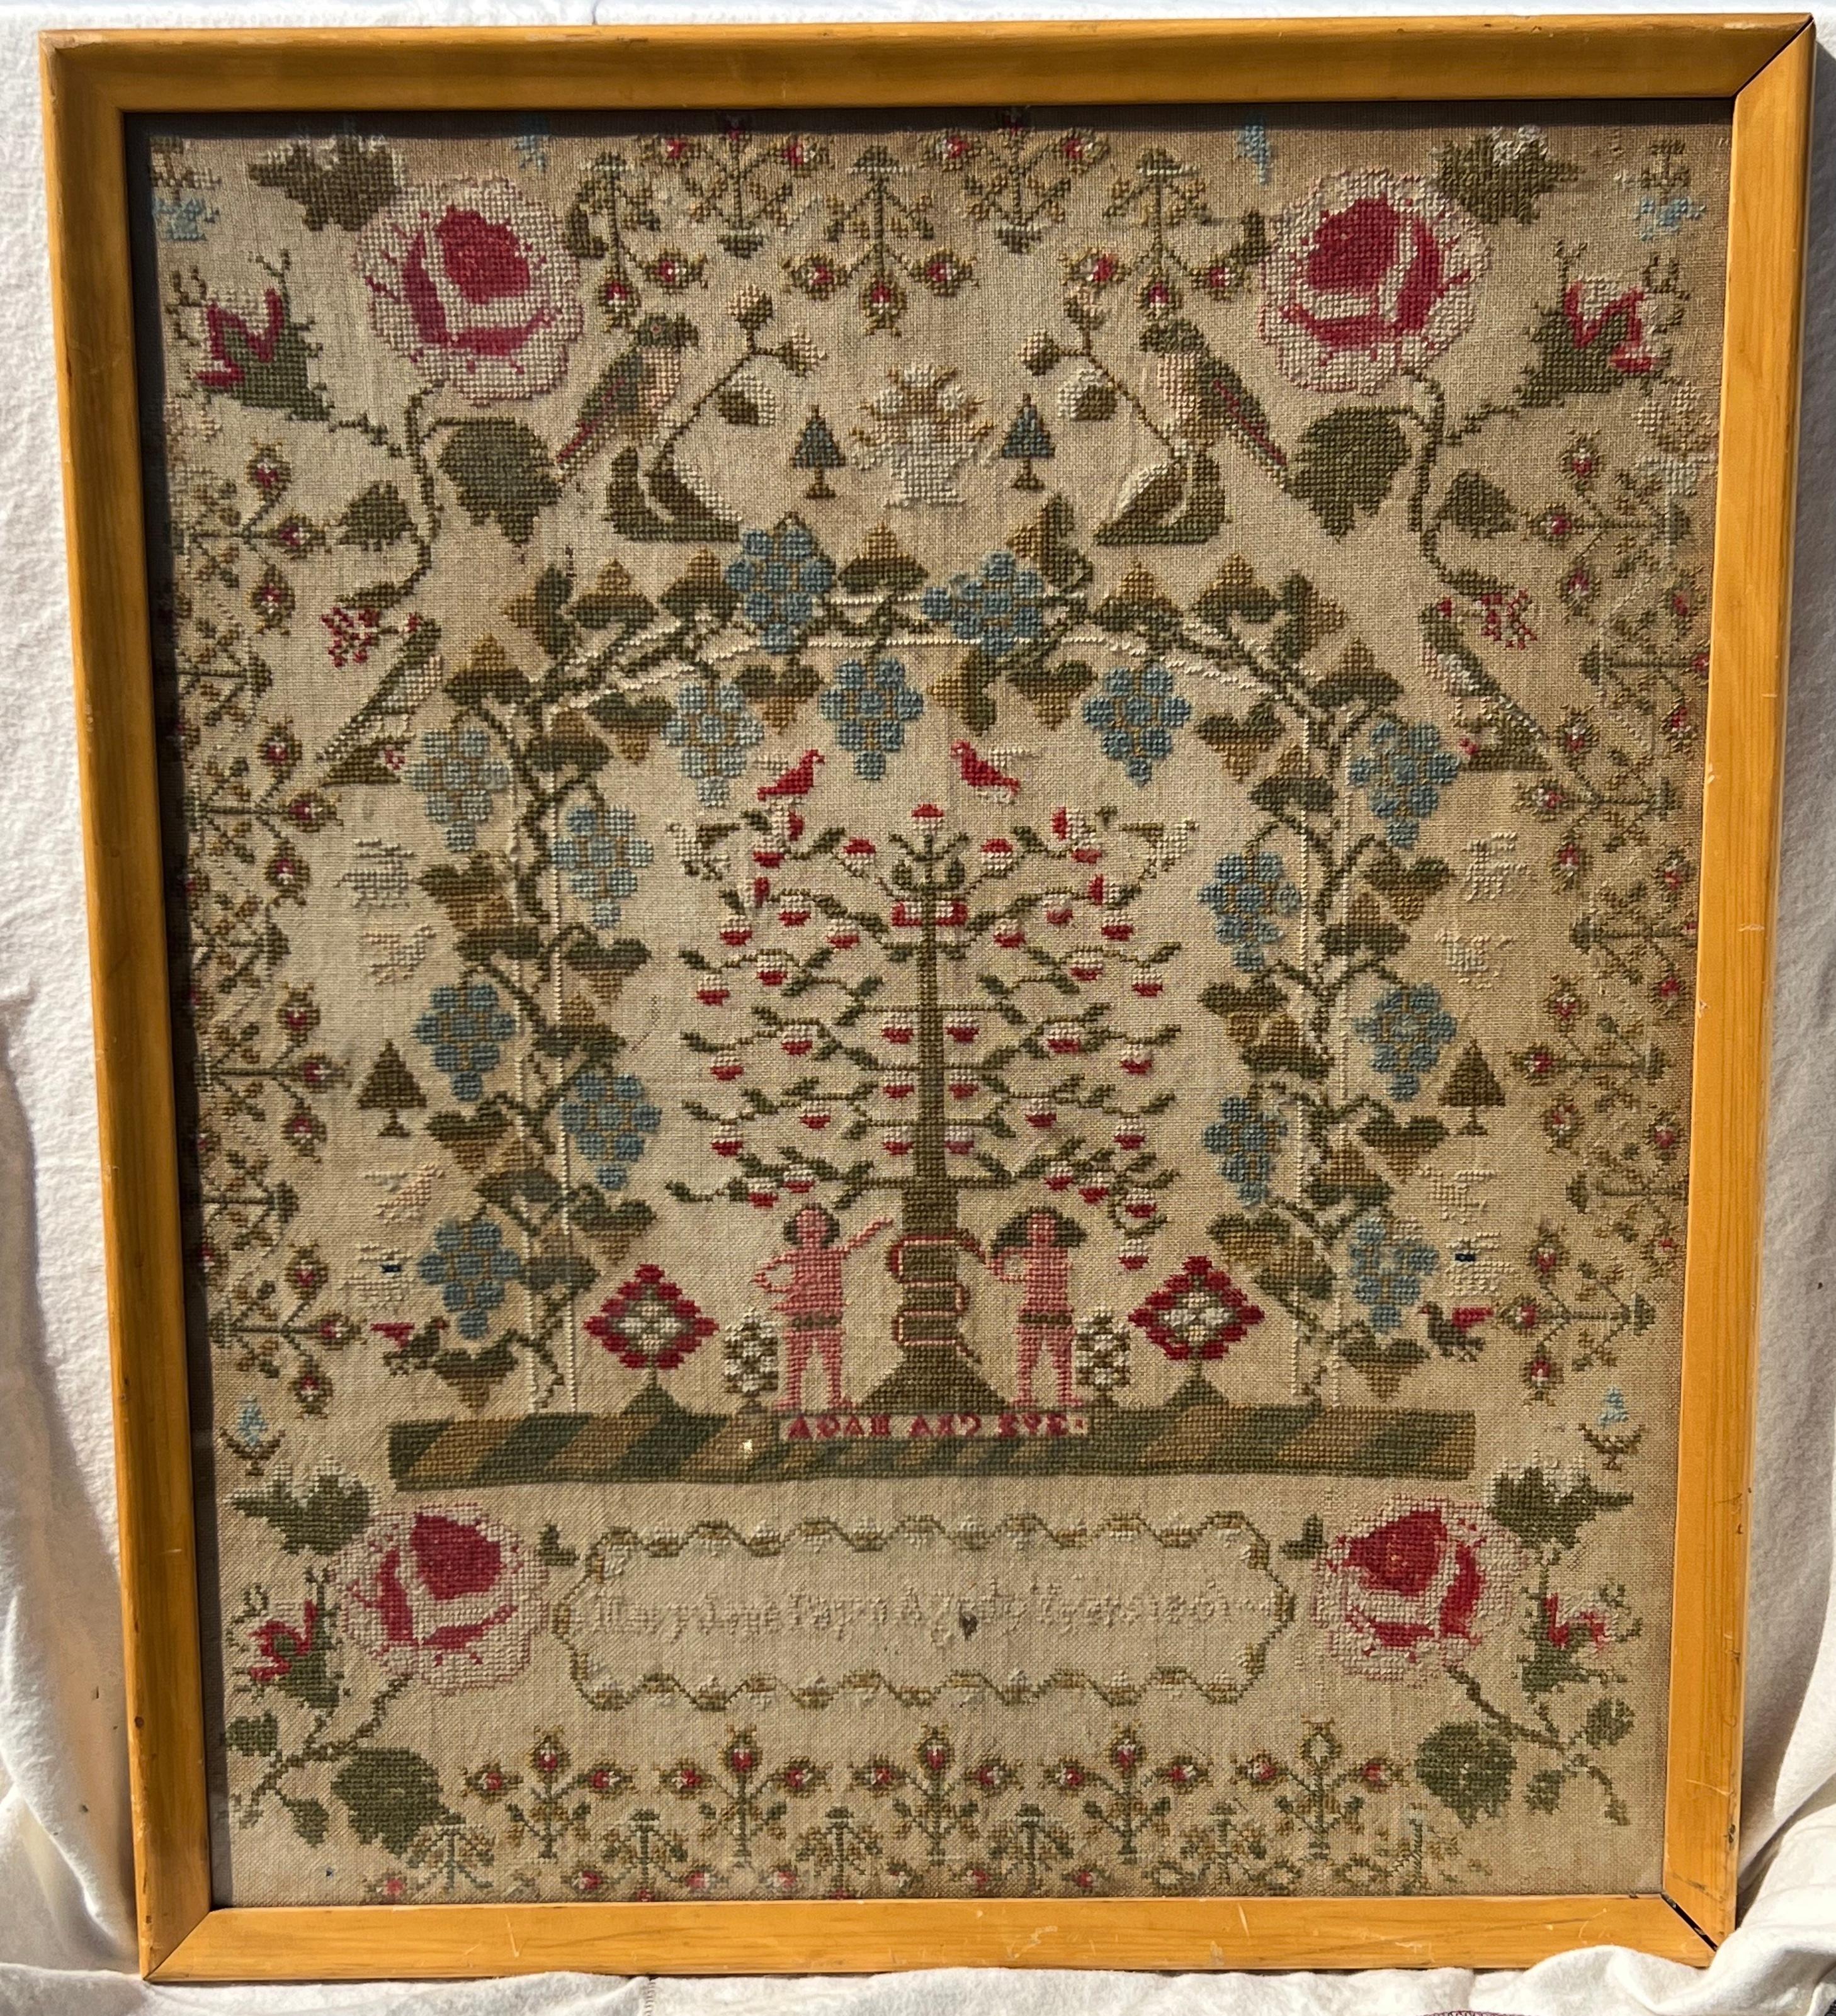 Lovely 19th century needlework sampler with central scene of Adam and Eve, the apple tree, and intertwined snake at the tree's trunk. Surrounded by floral embroidery as well as grapes and grape leaves as well as other flora and fauna. Illegible